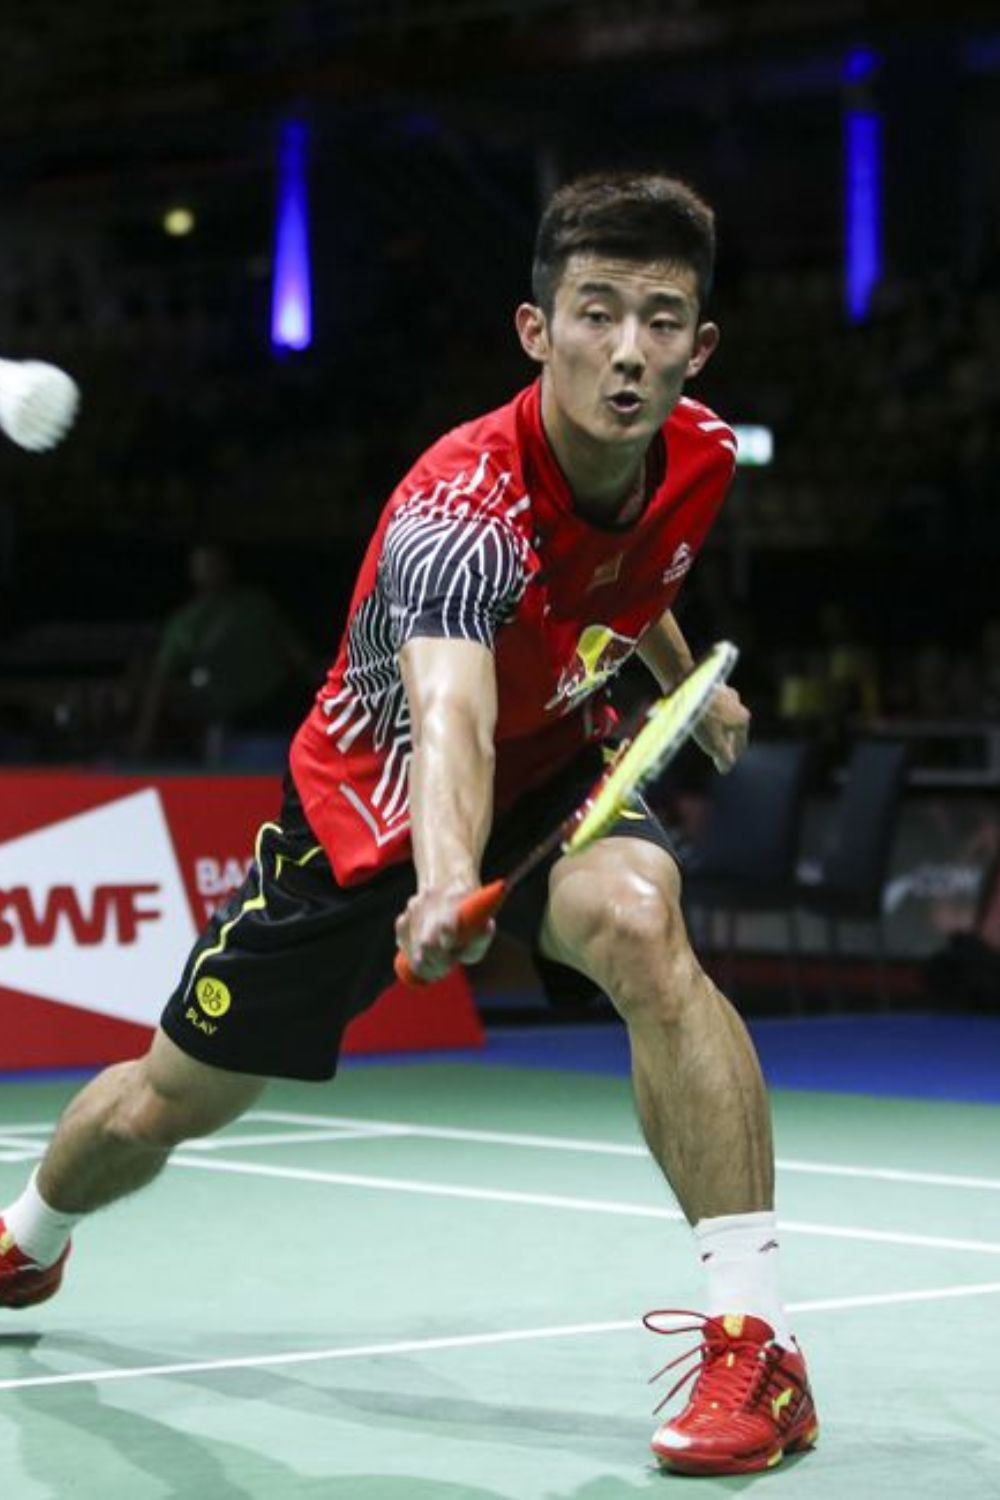 Chen Long, The Former No. 1, Holds The Current Ranking Of 6 In Men's Singles. (Source Badminton Blaze.com)